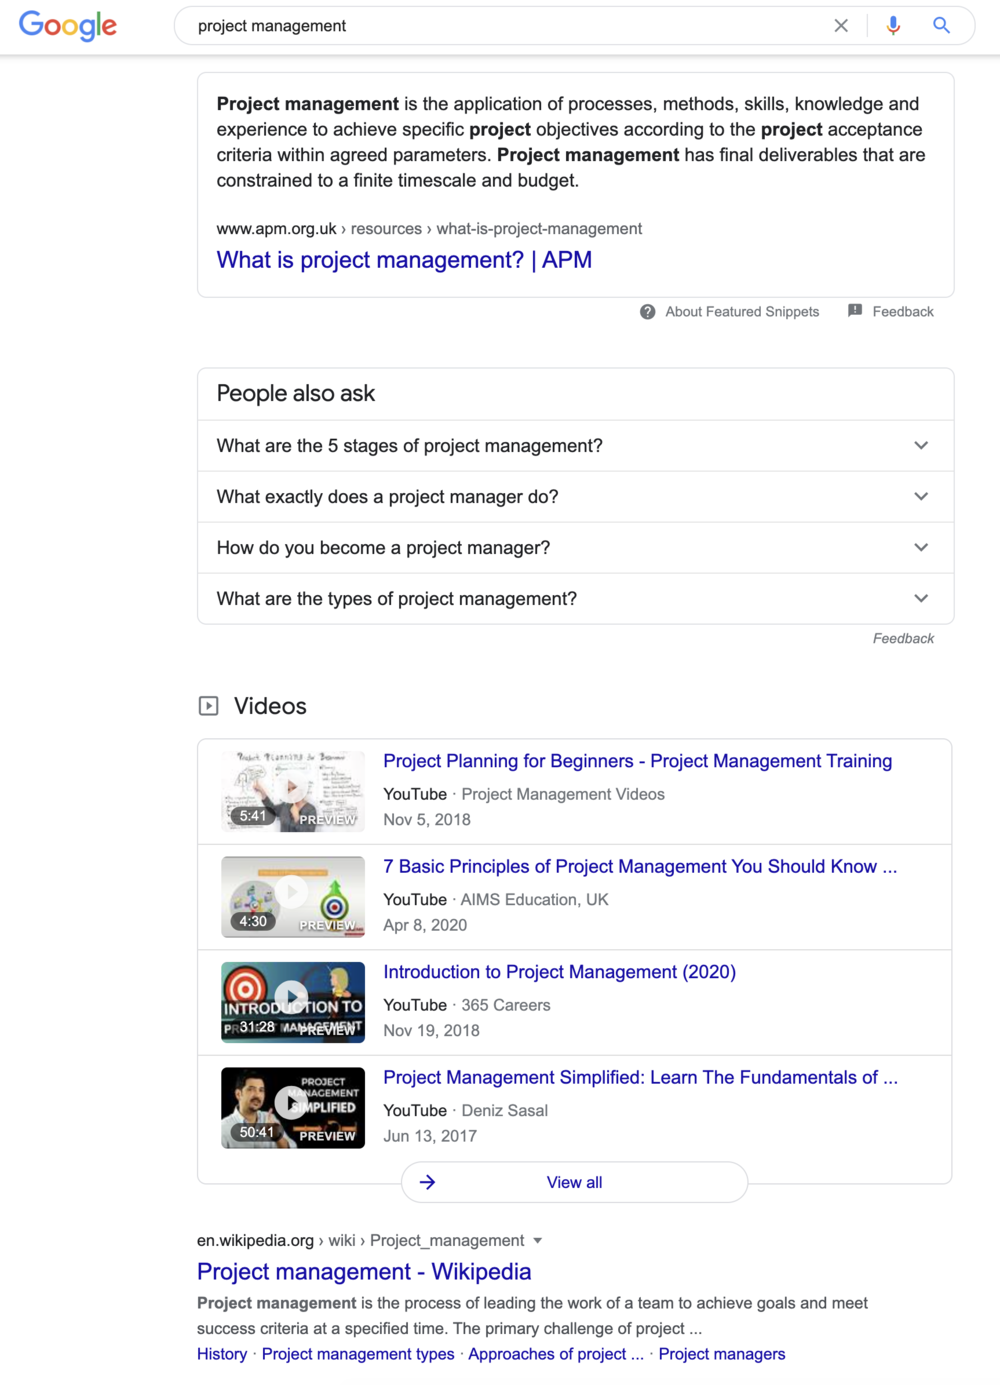 Google search results for the keyword ''project management”